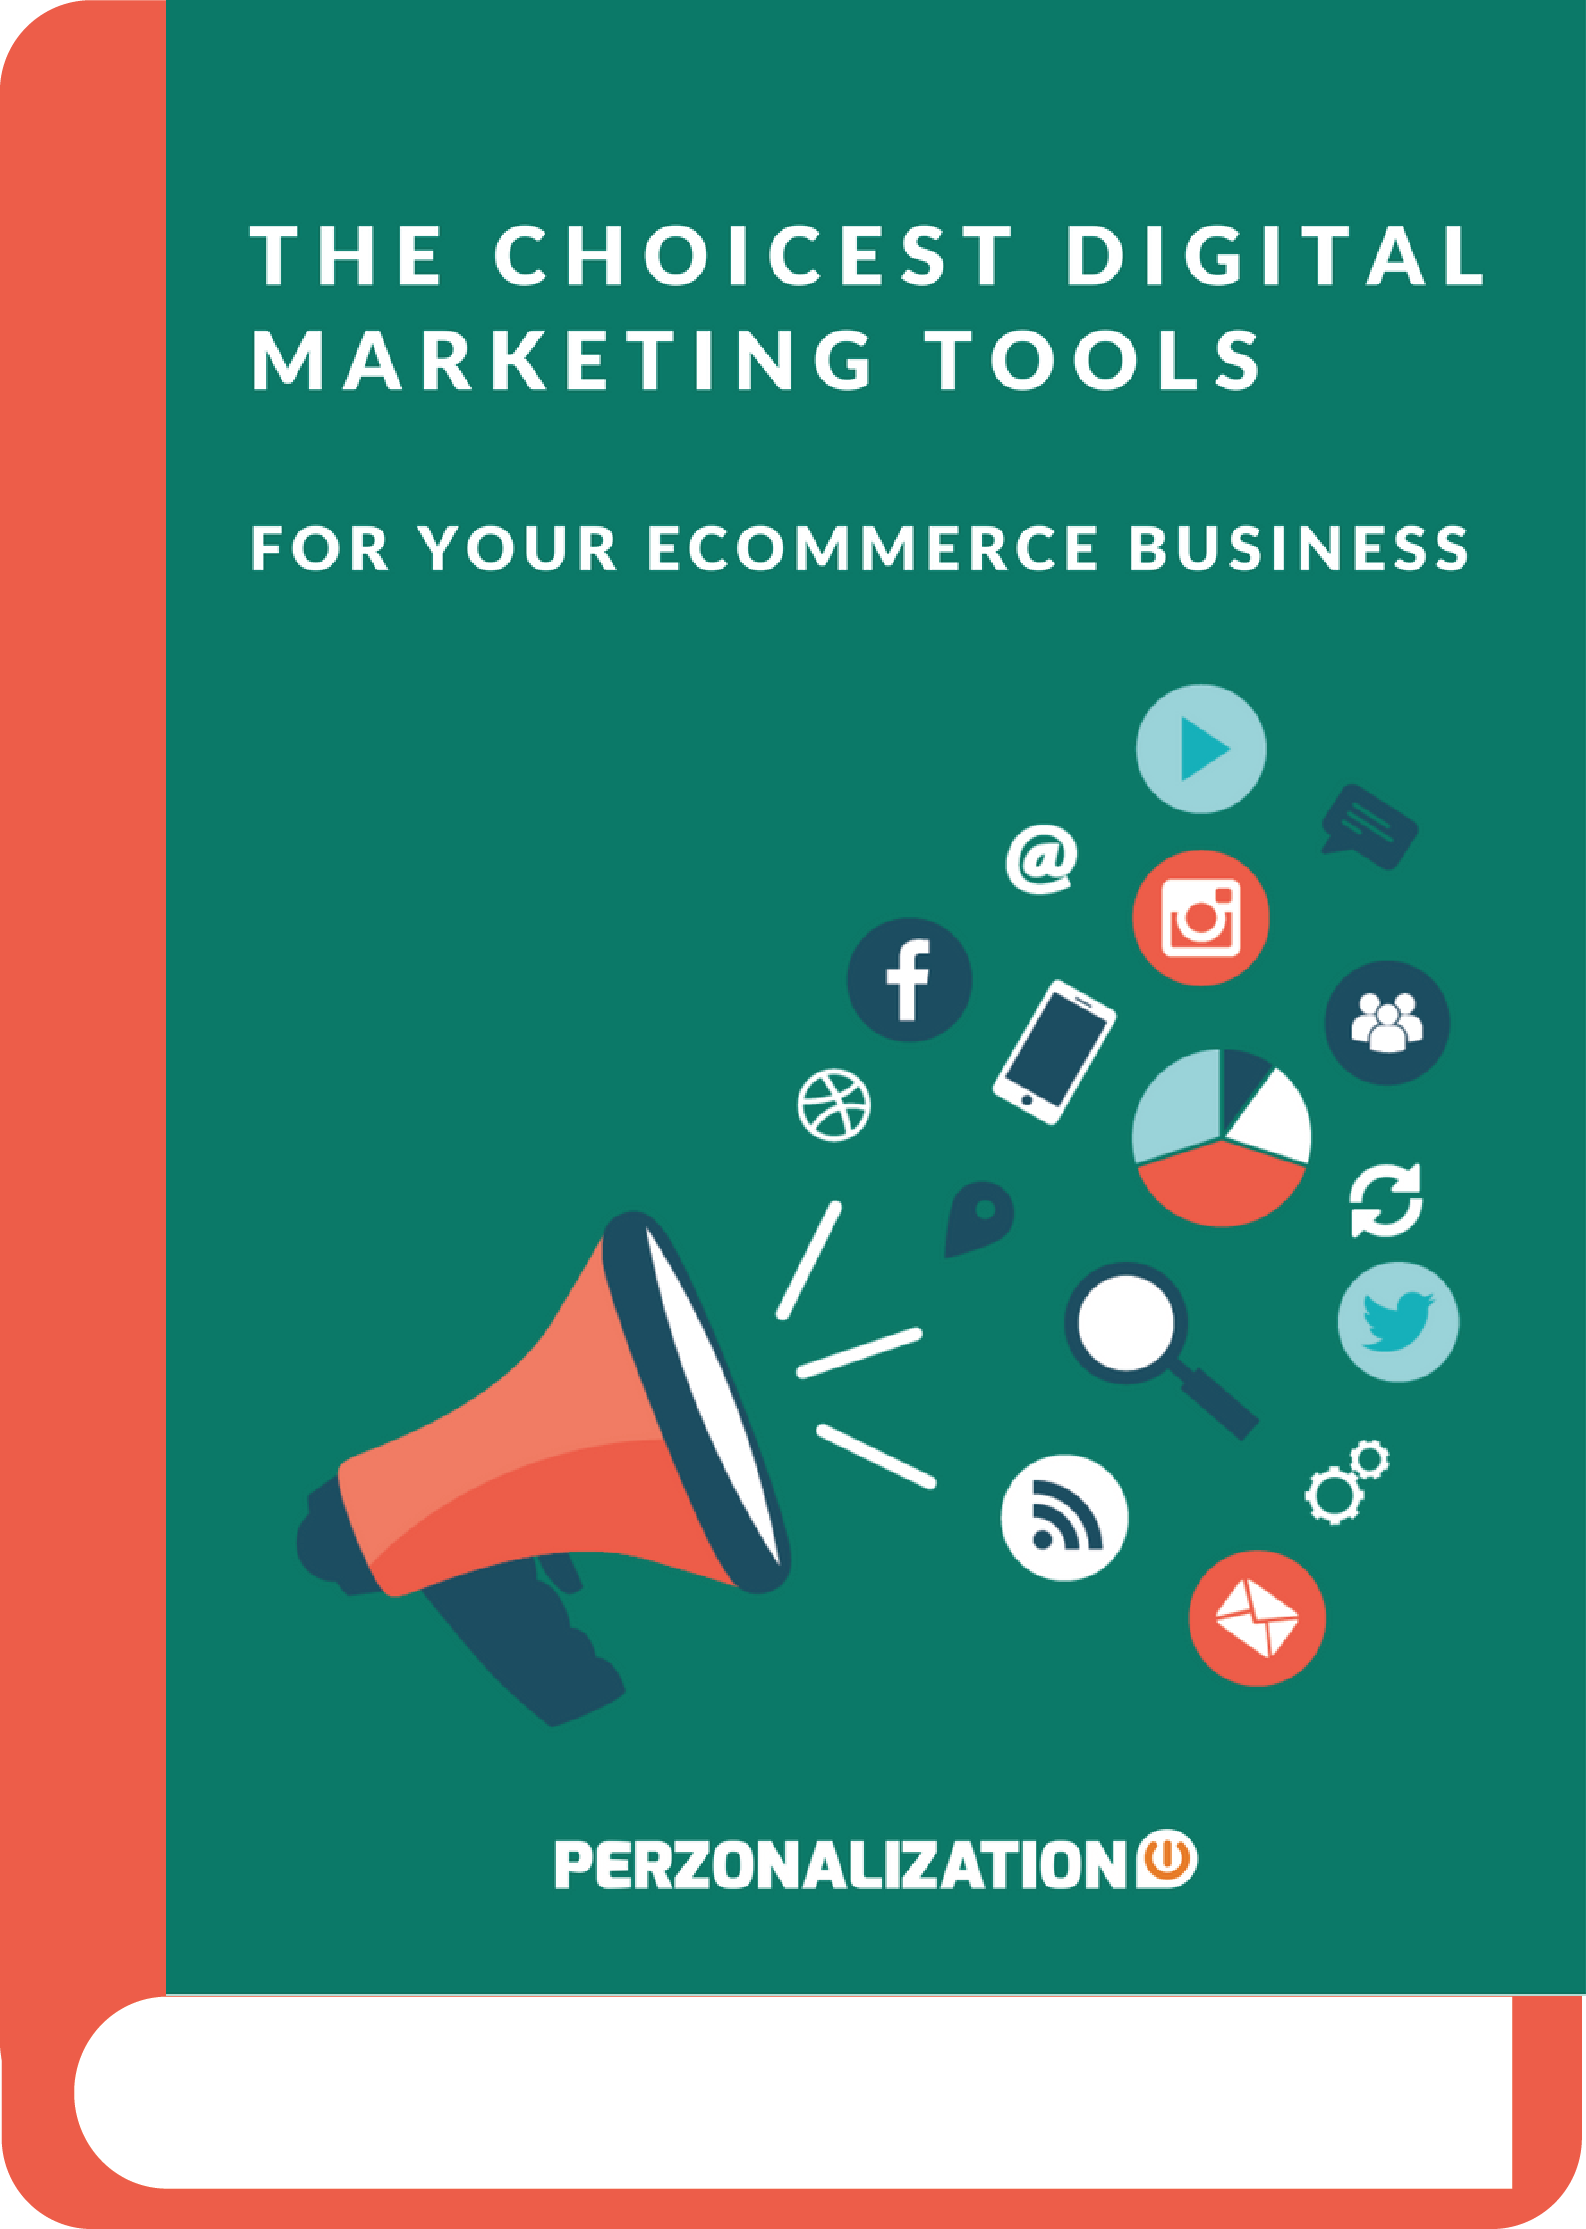 There is no dearth of online digital marketing tools for your eCommerce website these days. Here’s our pick of the 5 best tools for eCommerce marketing.